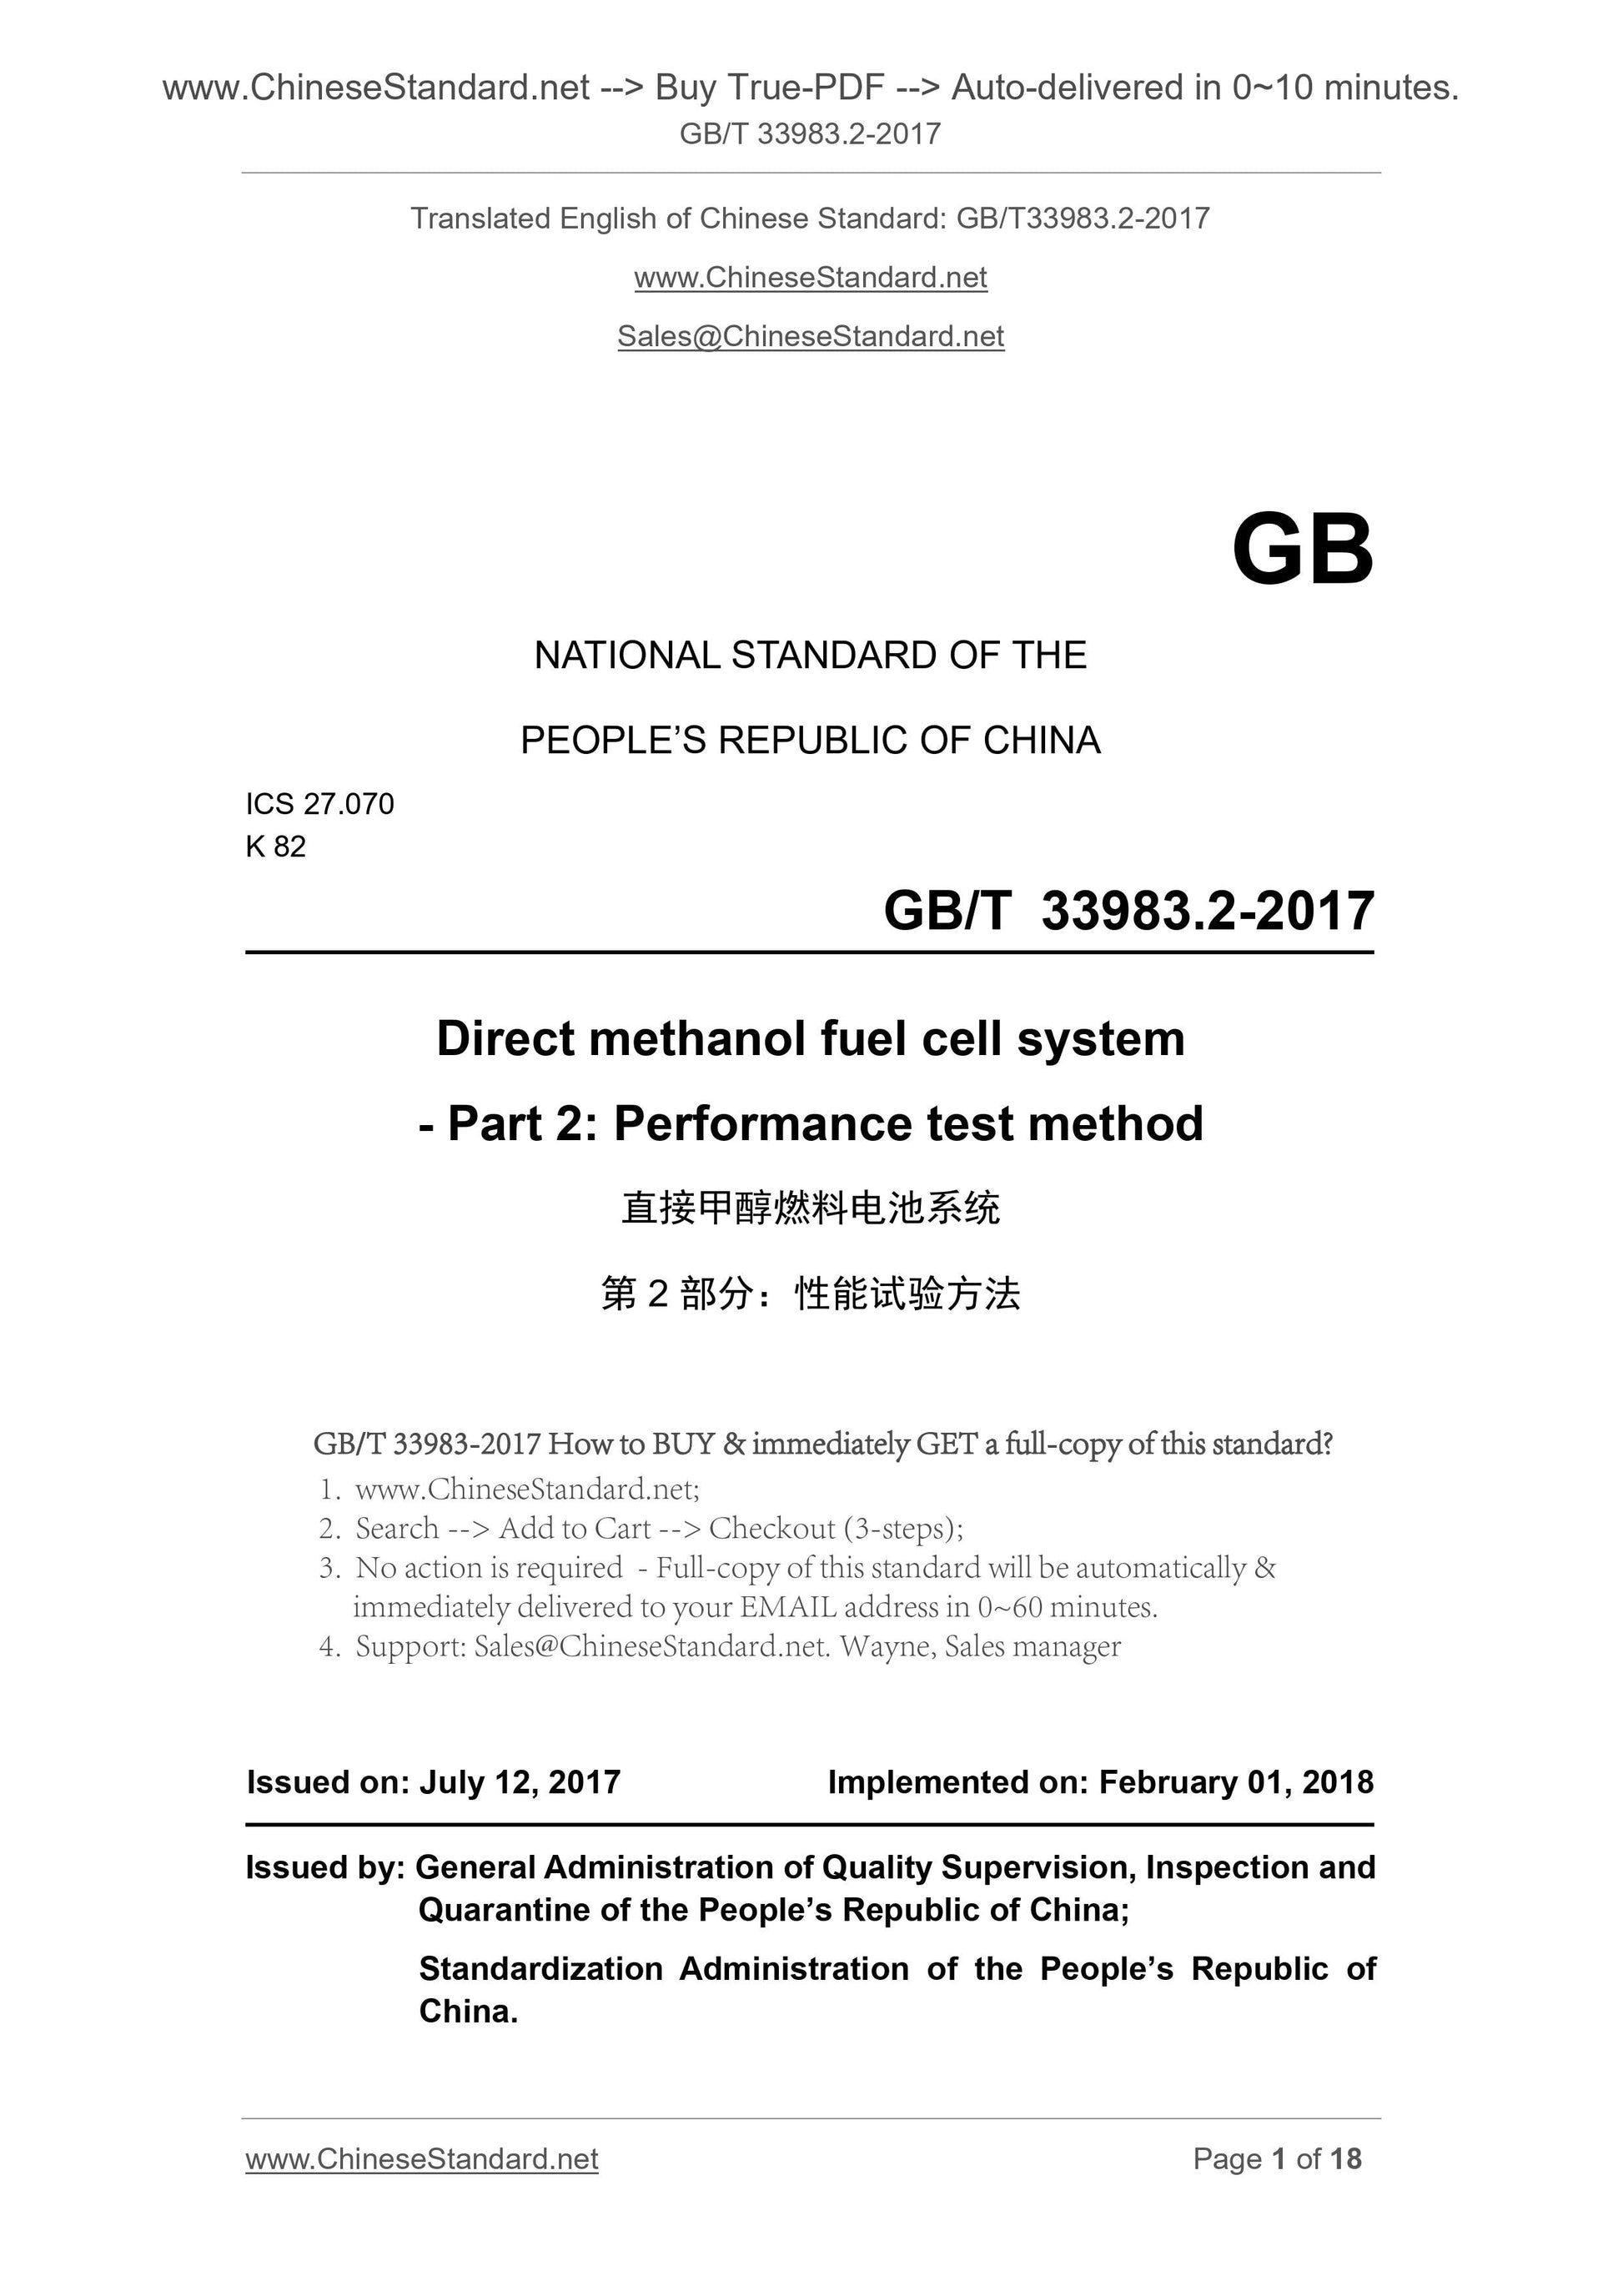 GB/T 33983.2-2017 Page 1